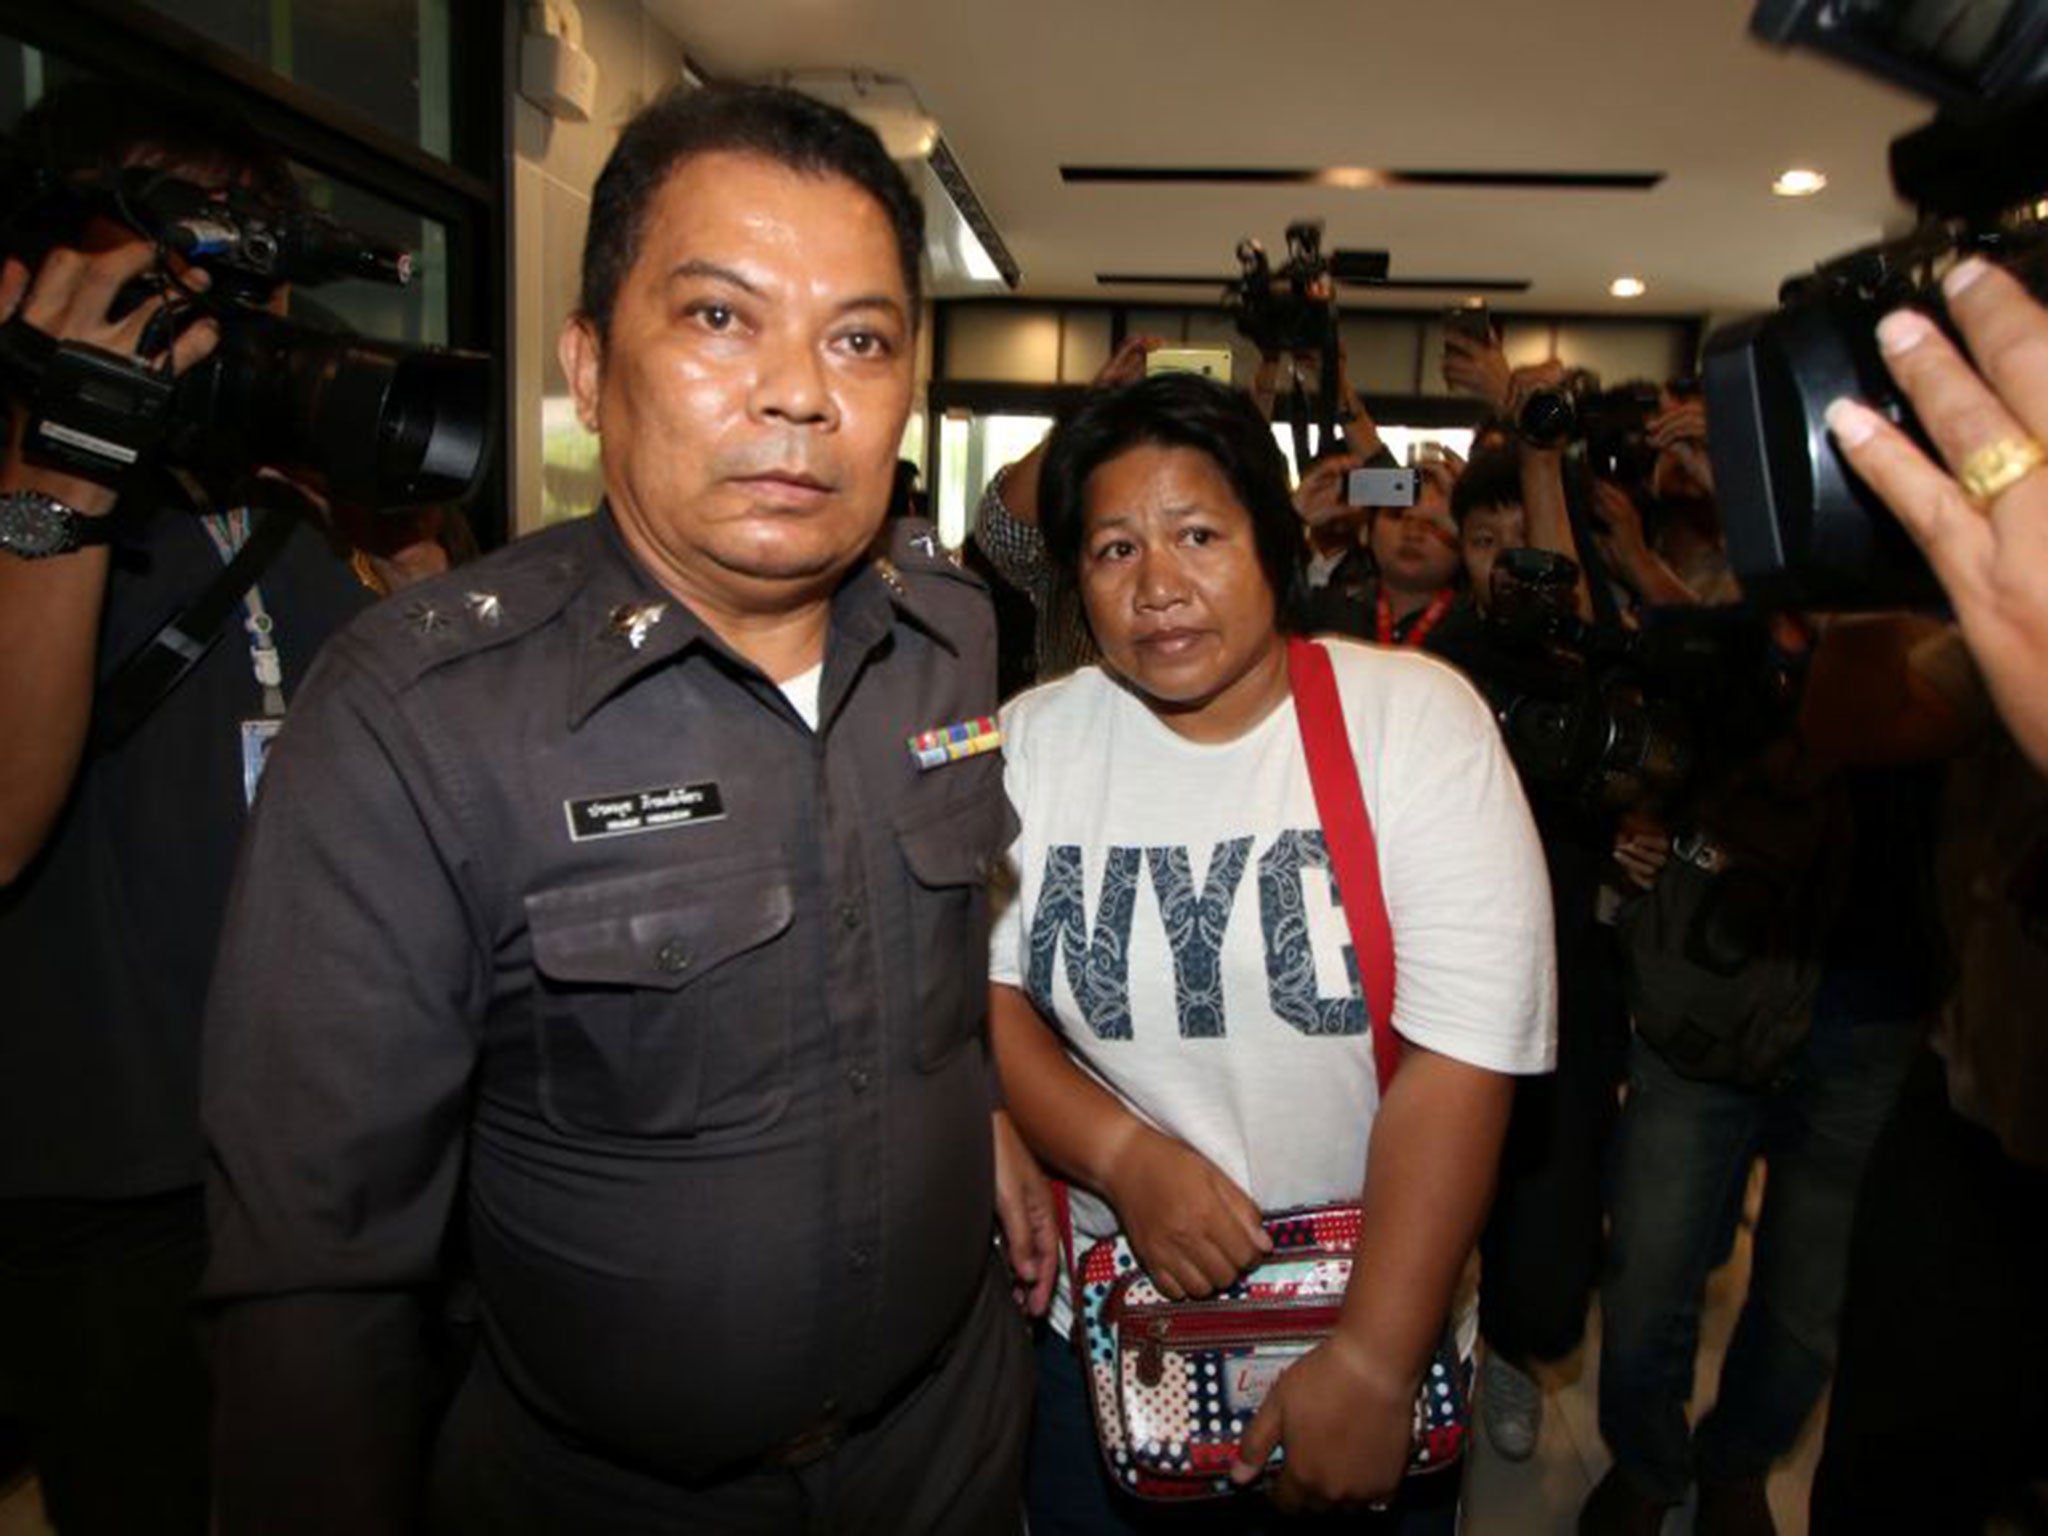 Patnaree Chankij is escorted by police as she arrives at a military court in Bangkok